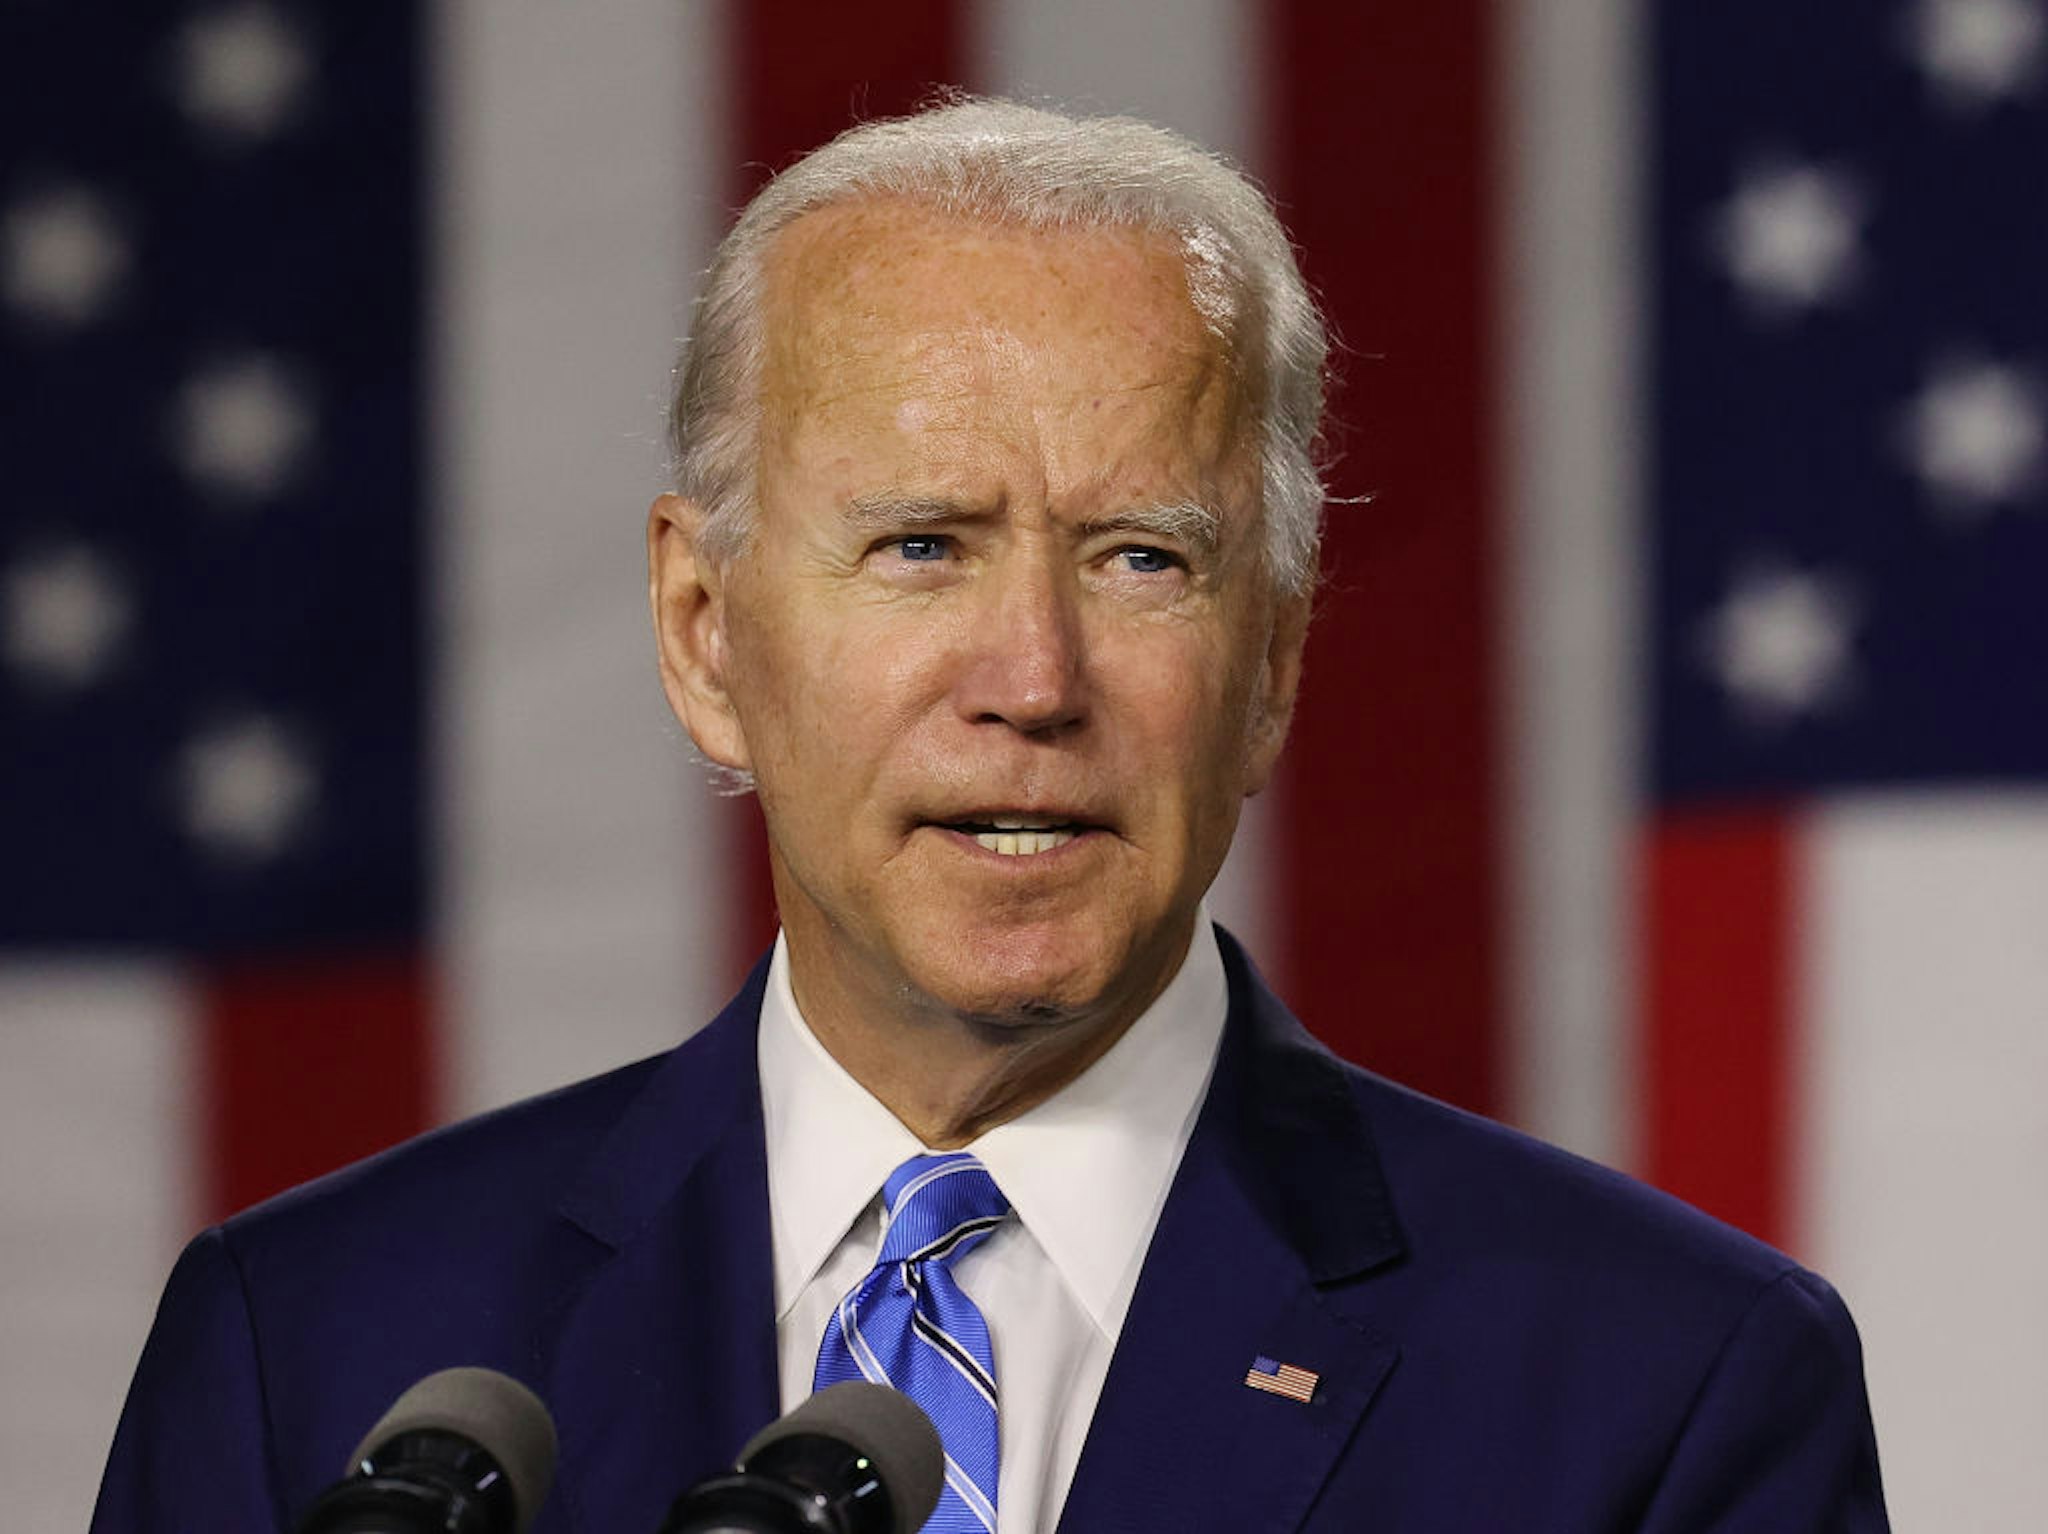 WILMINGTON, DELAWARE - JULY 14: Democratic presidential candidate former Vice President Joe Biden speaks at the Chase Center July 14, 2020 in Wilmington, Delaware. Biden delivered remarks on his campaign's 'Build Back Better' clean energy economic plan.